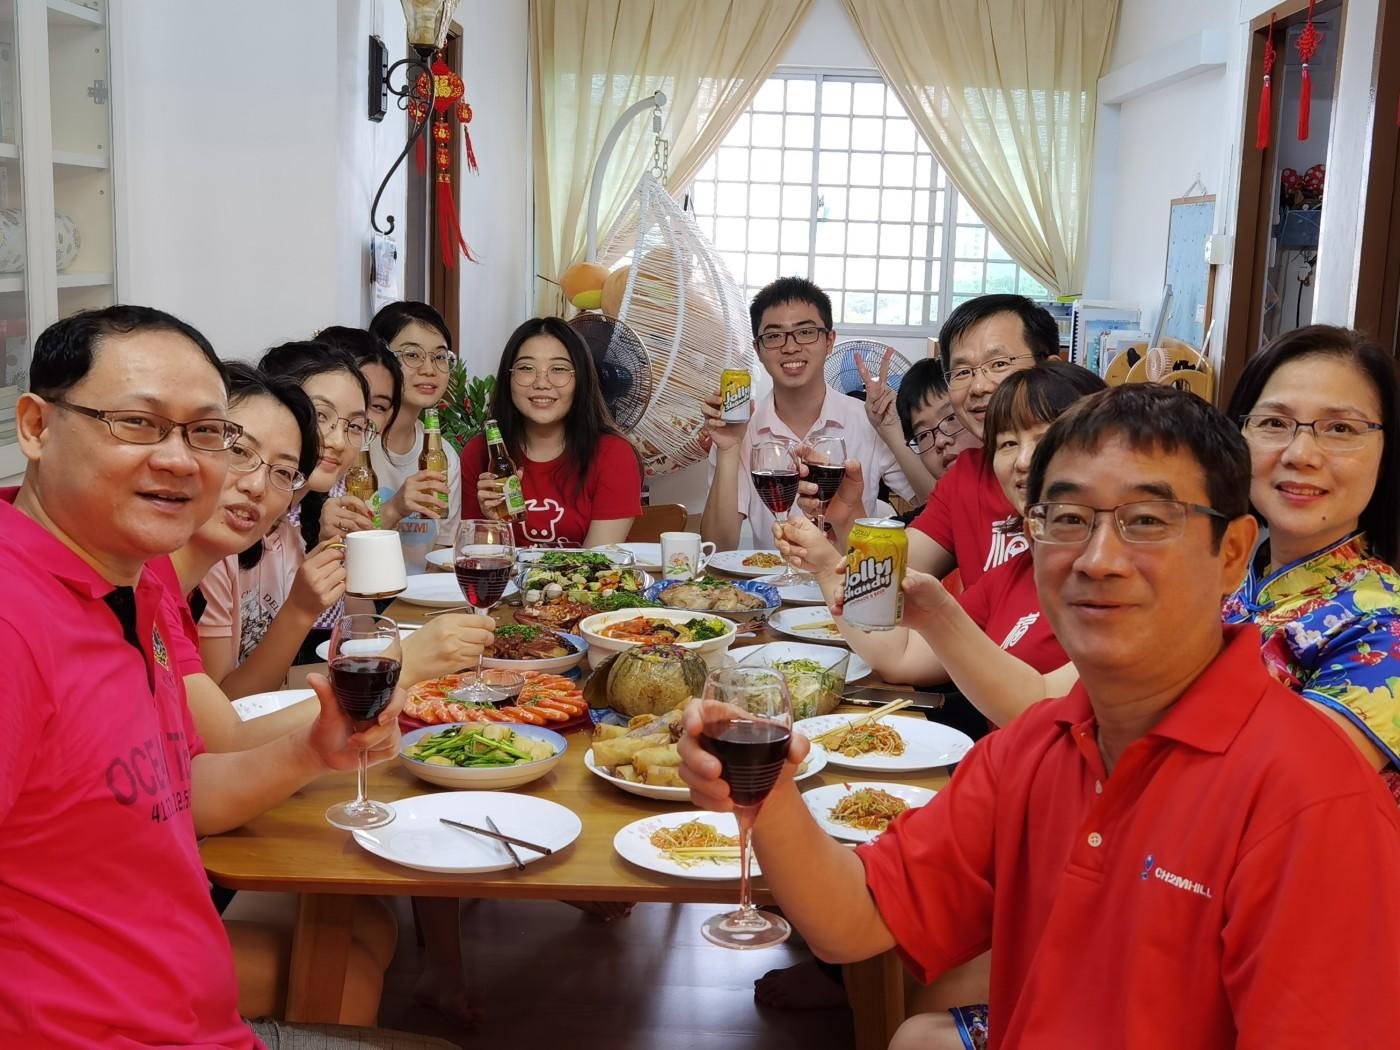 Keller Singapore Staff Celebrates Lunar New Year with Family